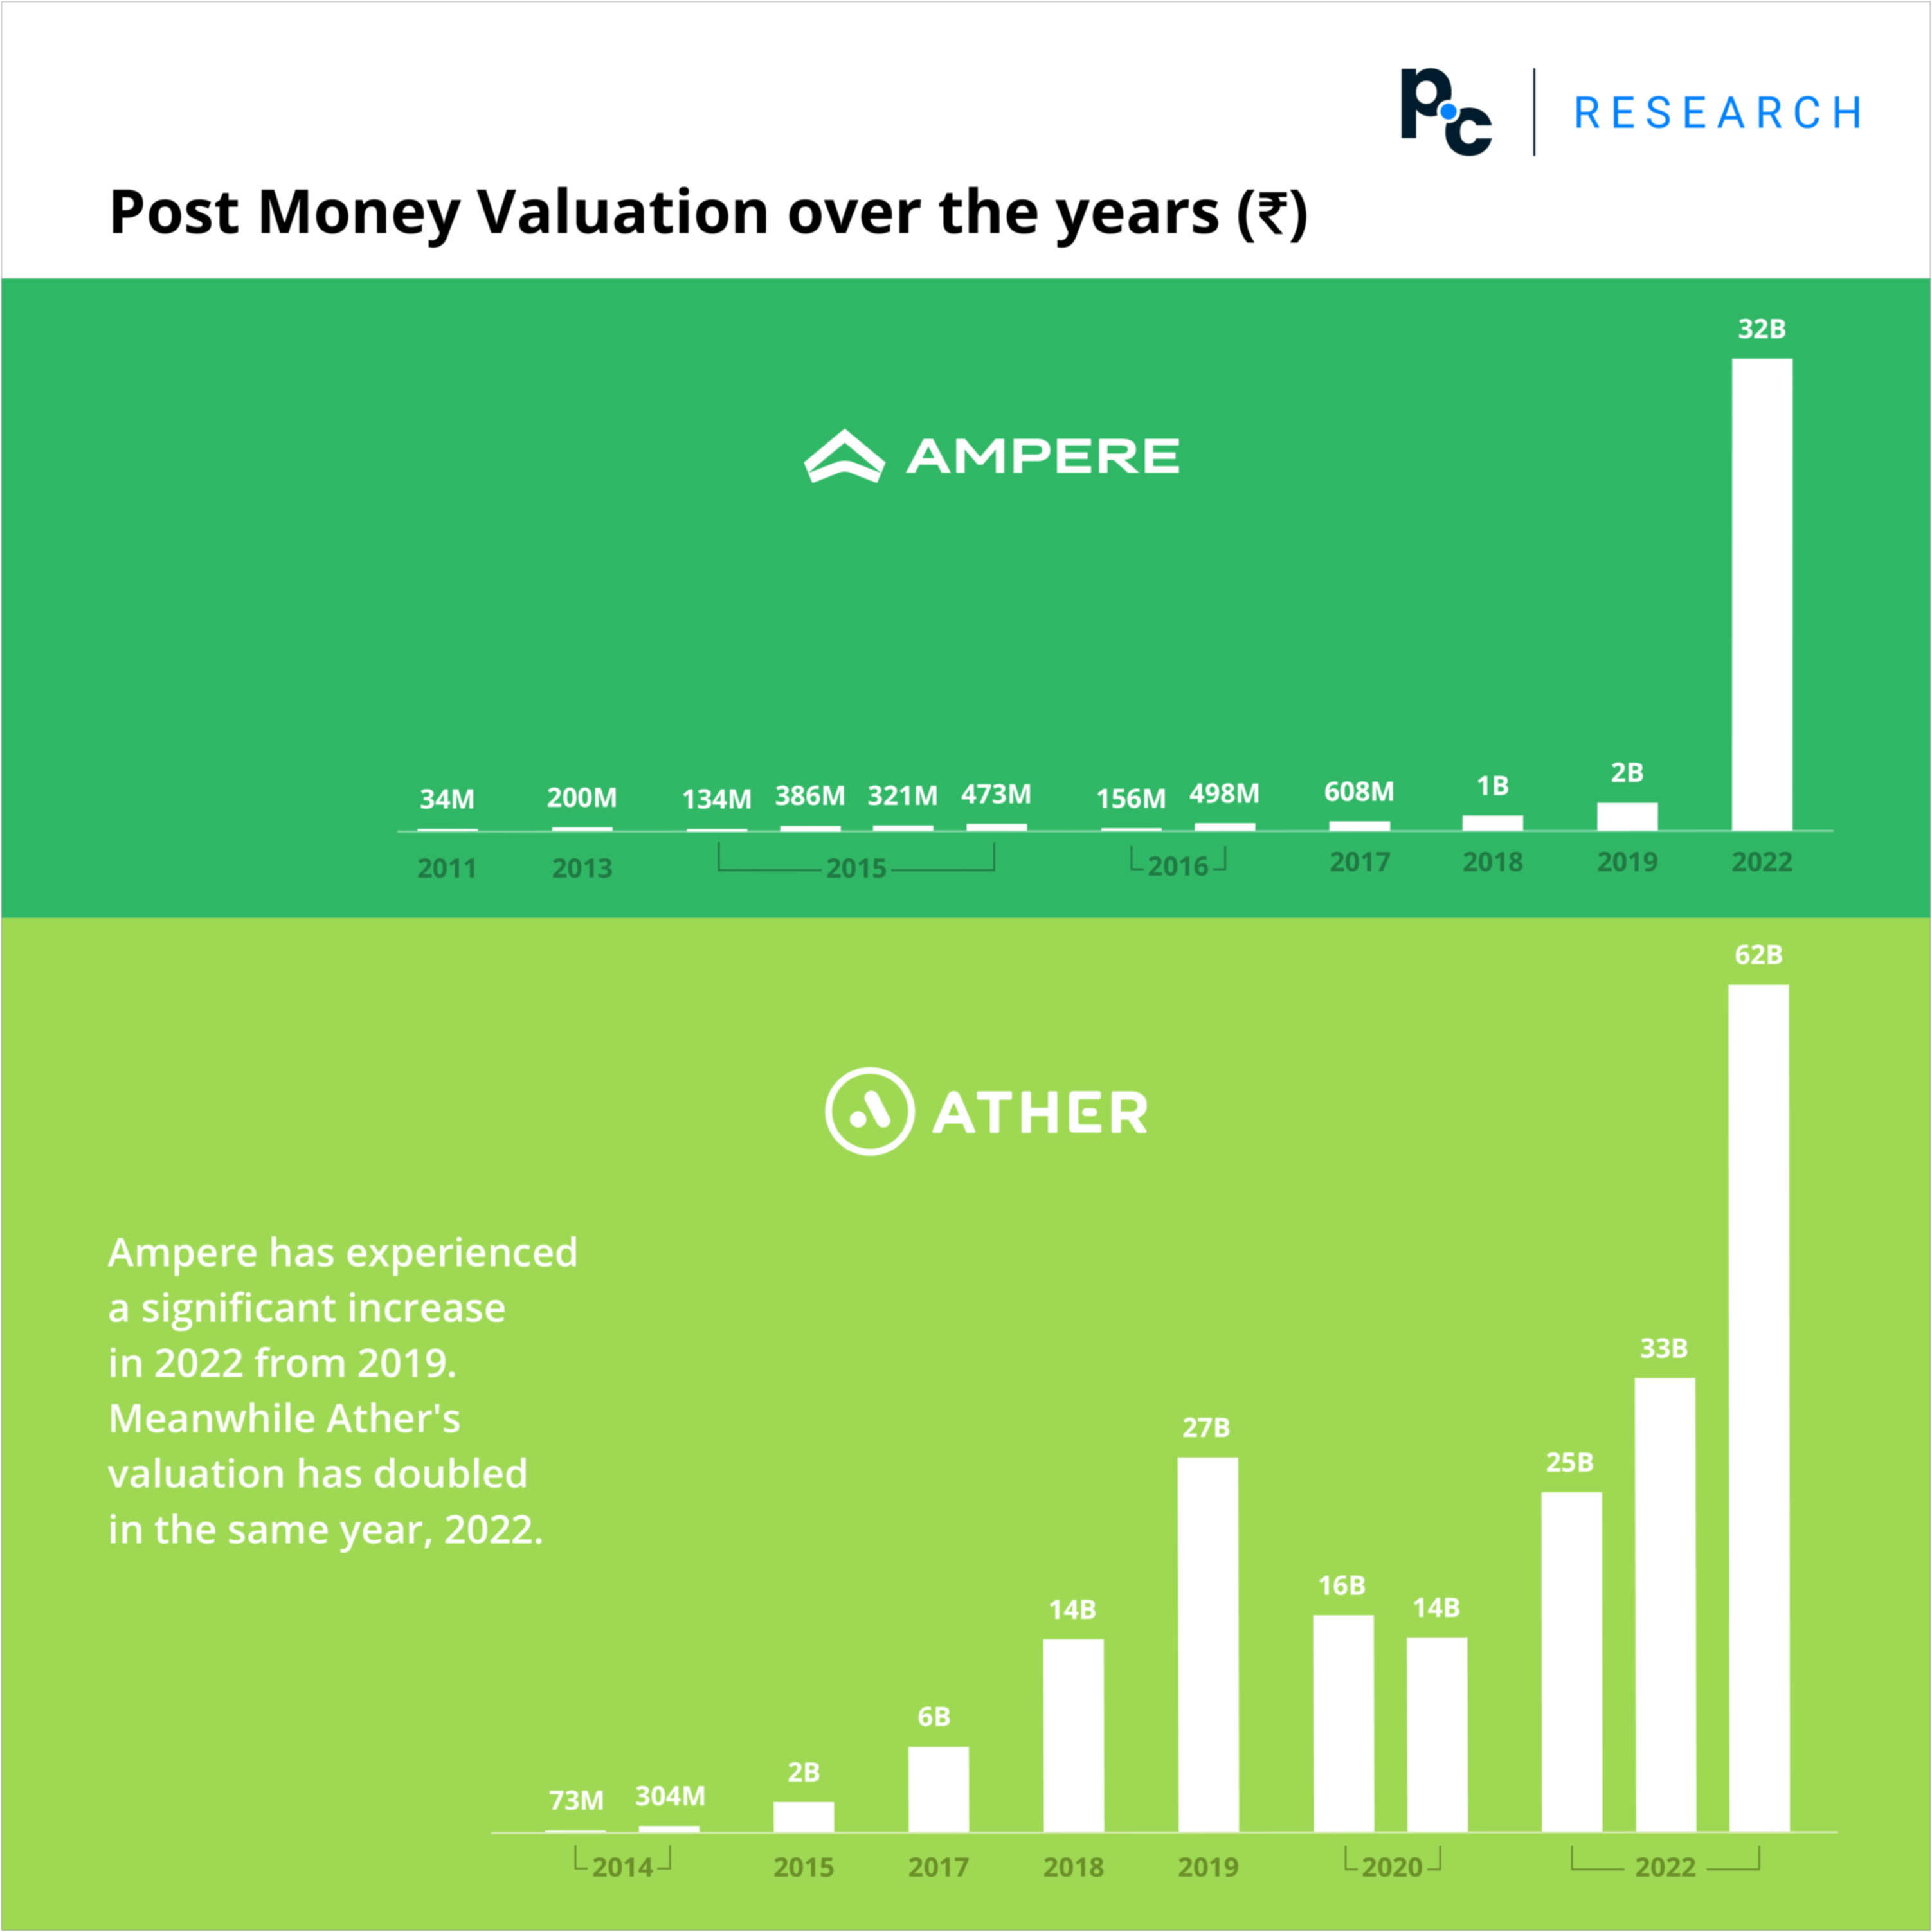 Post money valuation of Ampere and Ather over the years as seen on PrivateCircle Research.